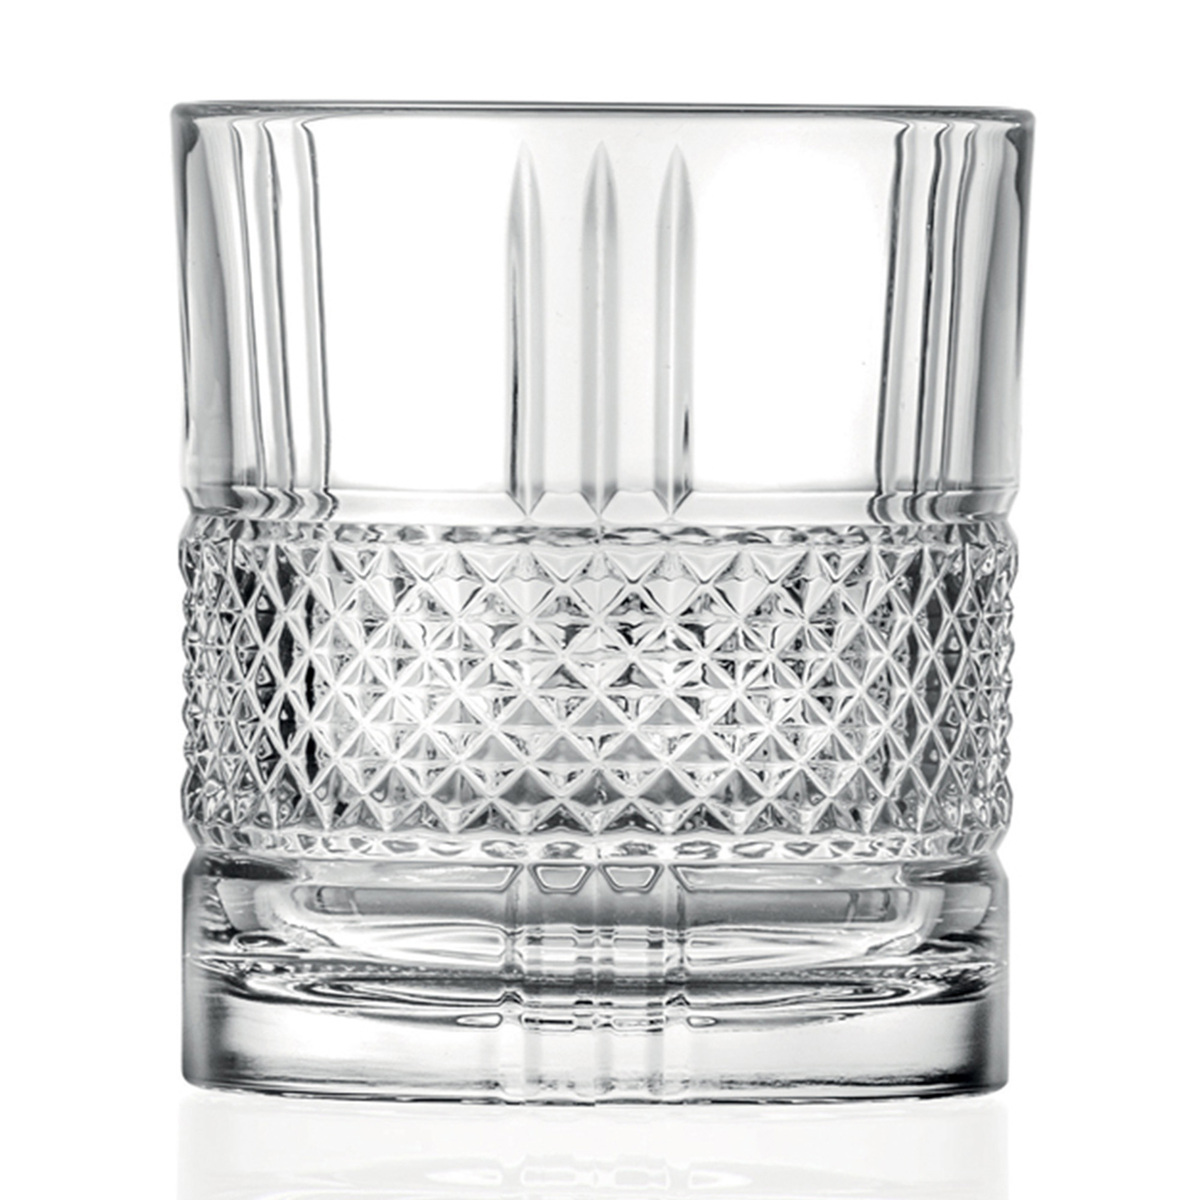 RCR Brilliante Crystal Whisky Glass, Pack of 6, Clear, RCR.CR267200